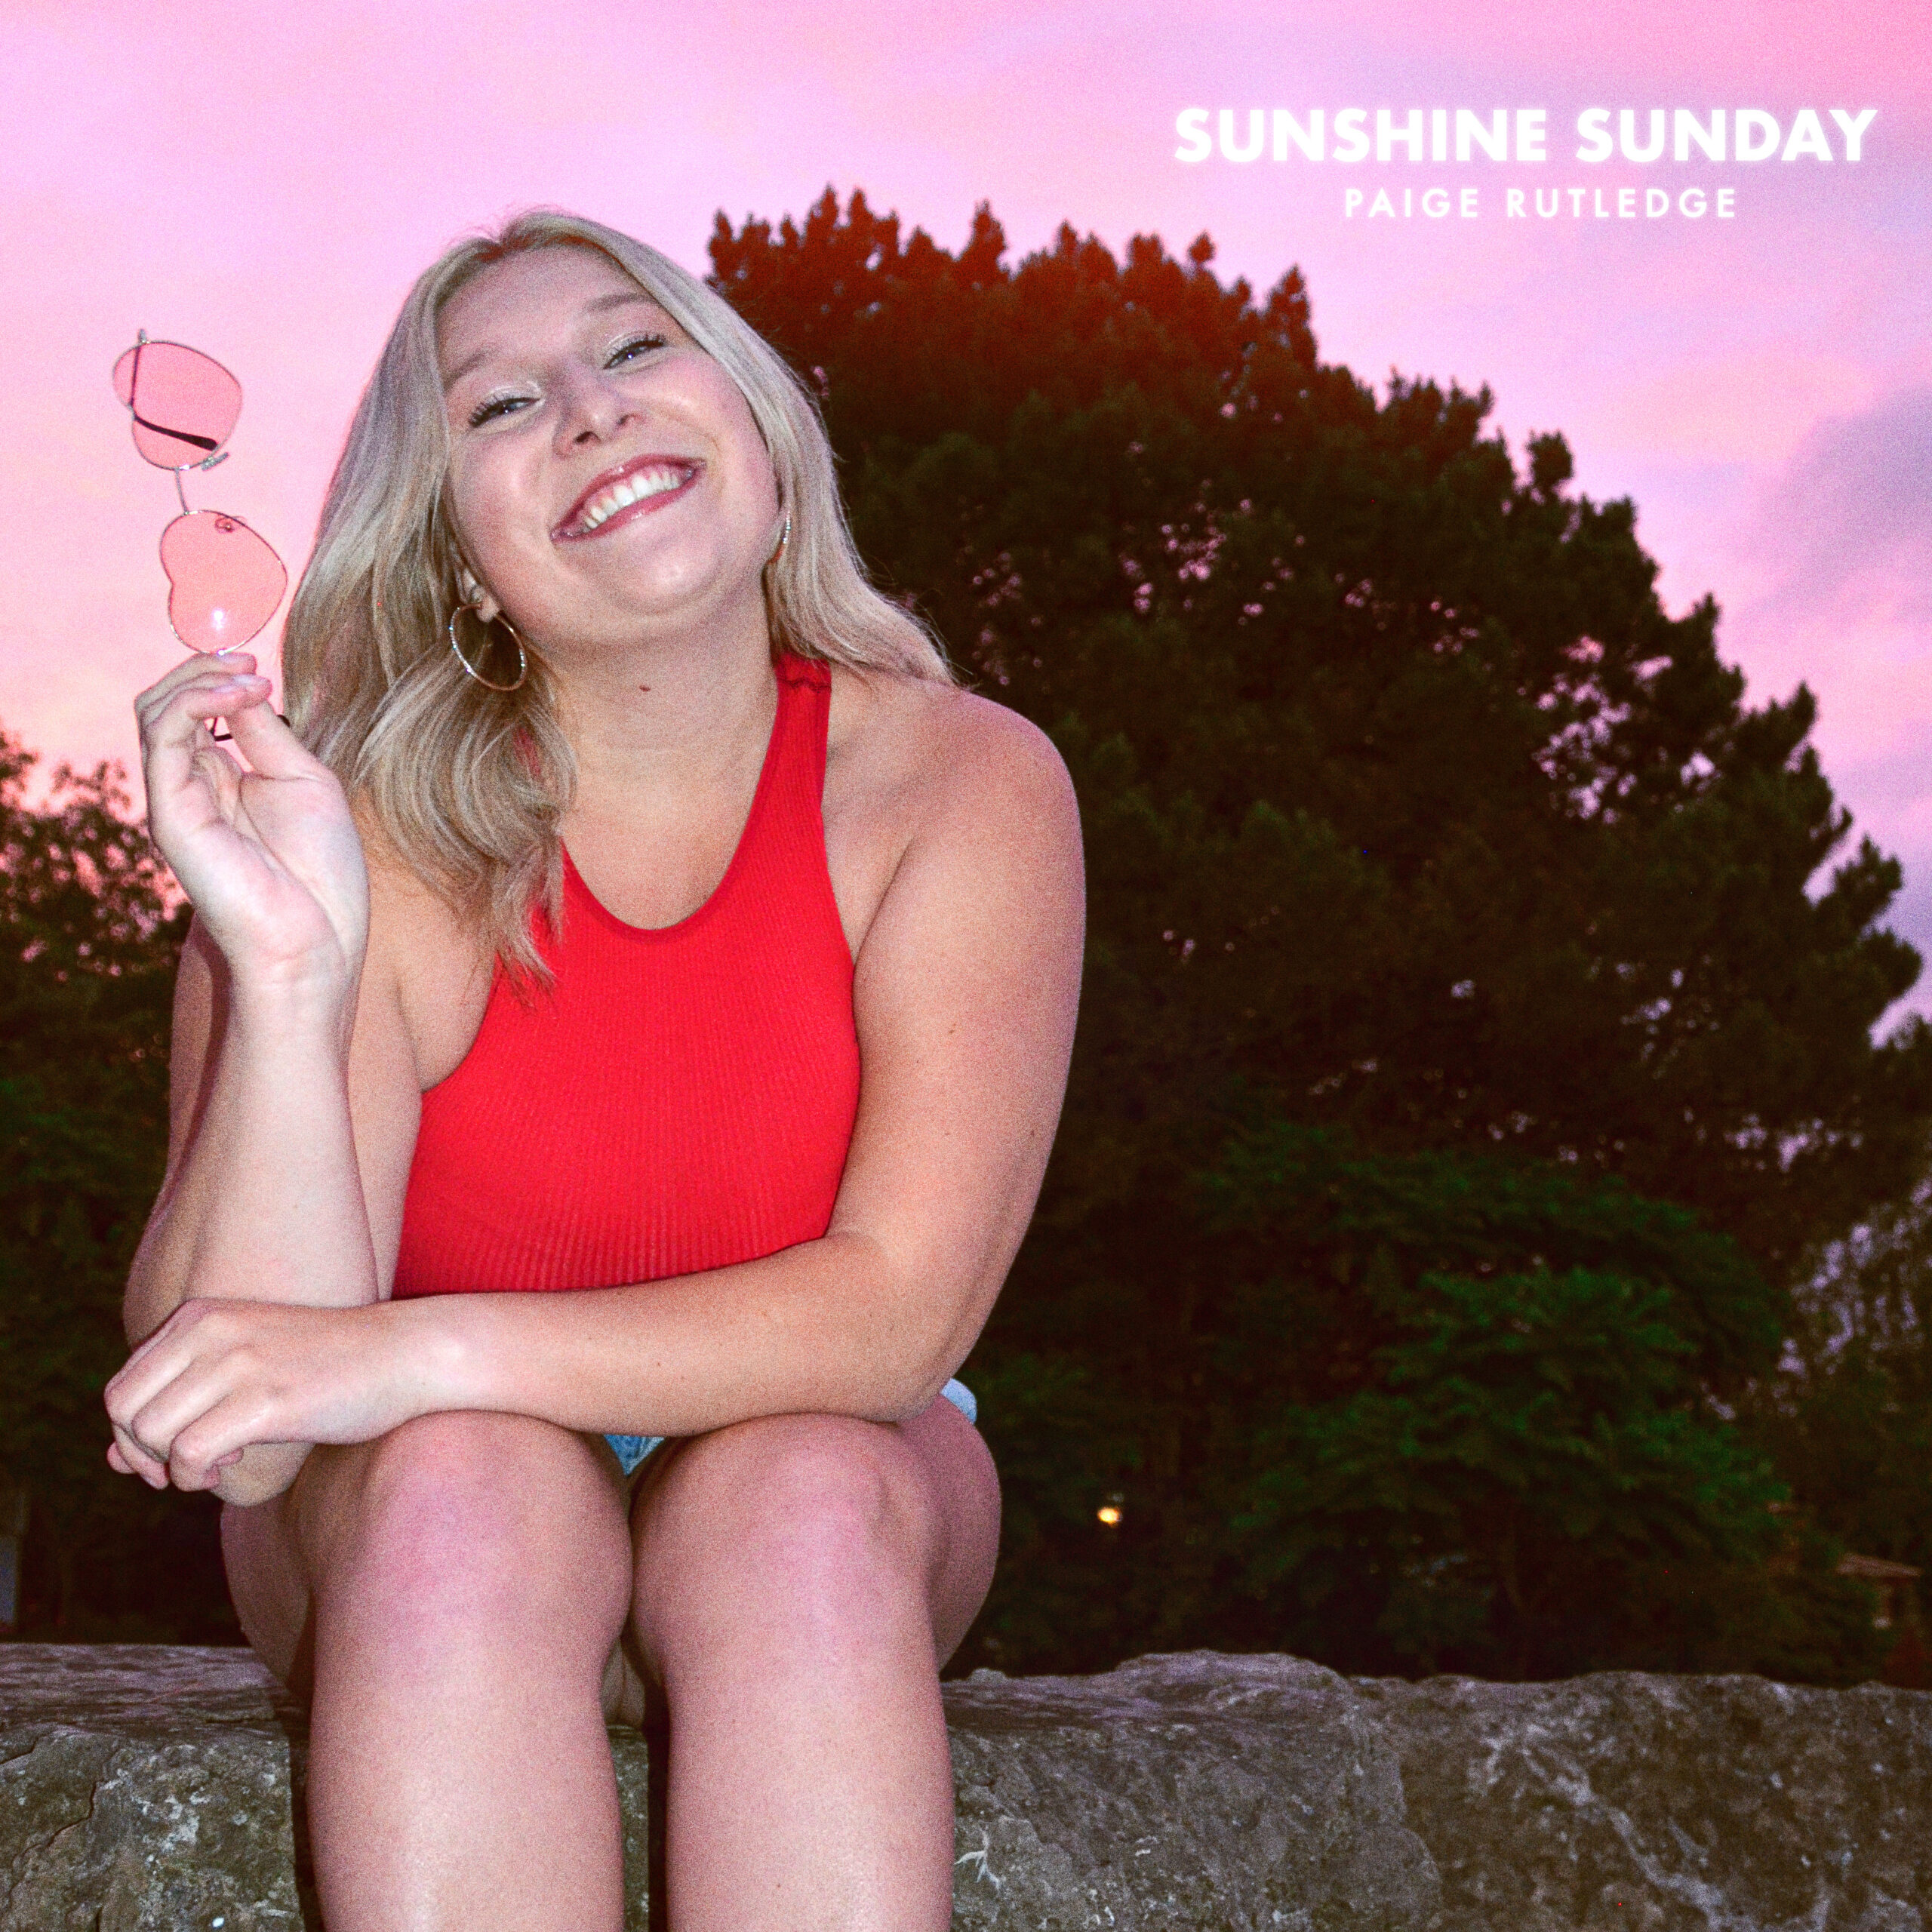 Official cover art for Paige Rutledge's latest single, "Sunshine Sunday".